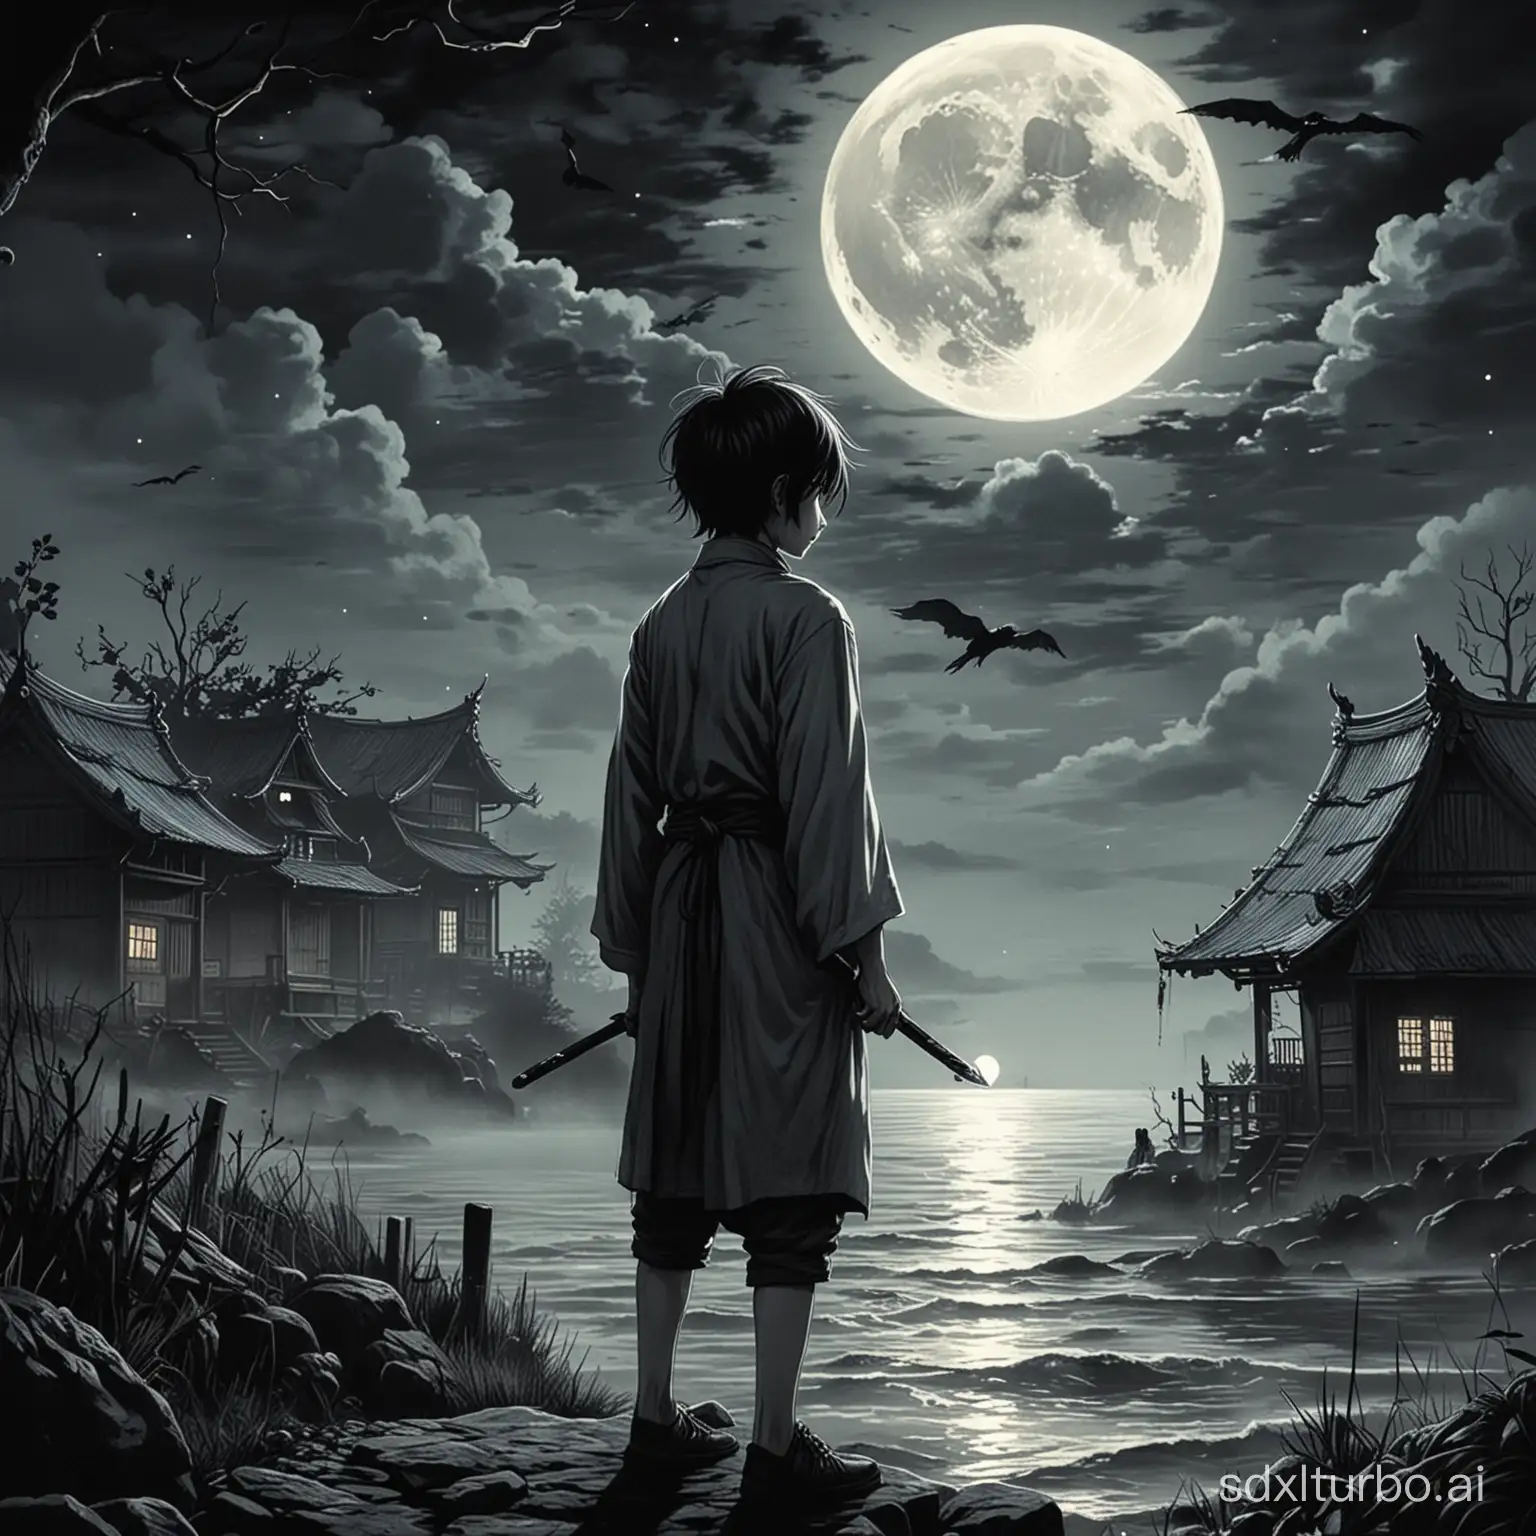 The story goes that, on a gloomy full moon night in the fourth episode of "The Tale of Lieu Trai", there was a talented manga artist who was obsessed with horror stories. He can create paintings so vivid that they make viewers shudder in fear. However, he himself did not expect that the creatures in the fictional world he created could become so scary.